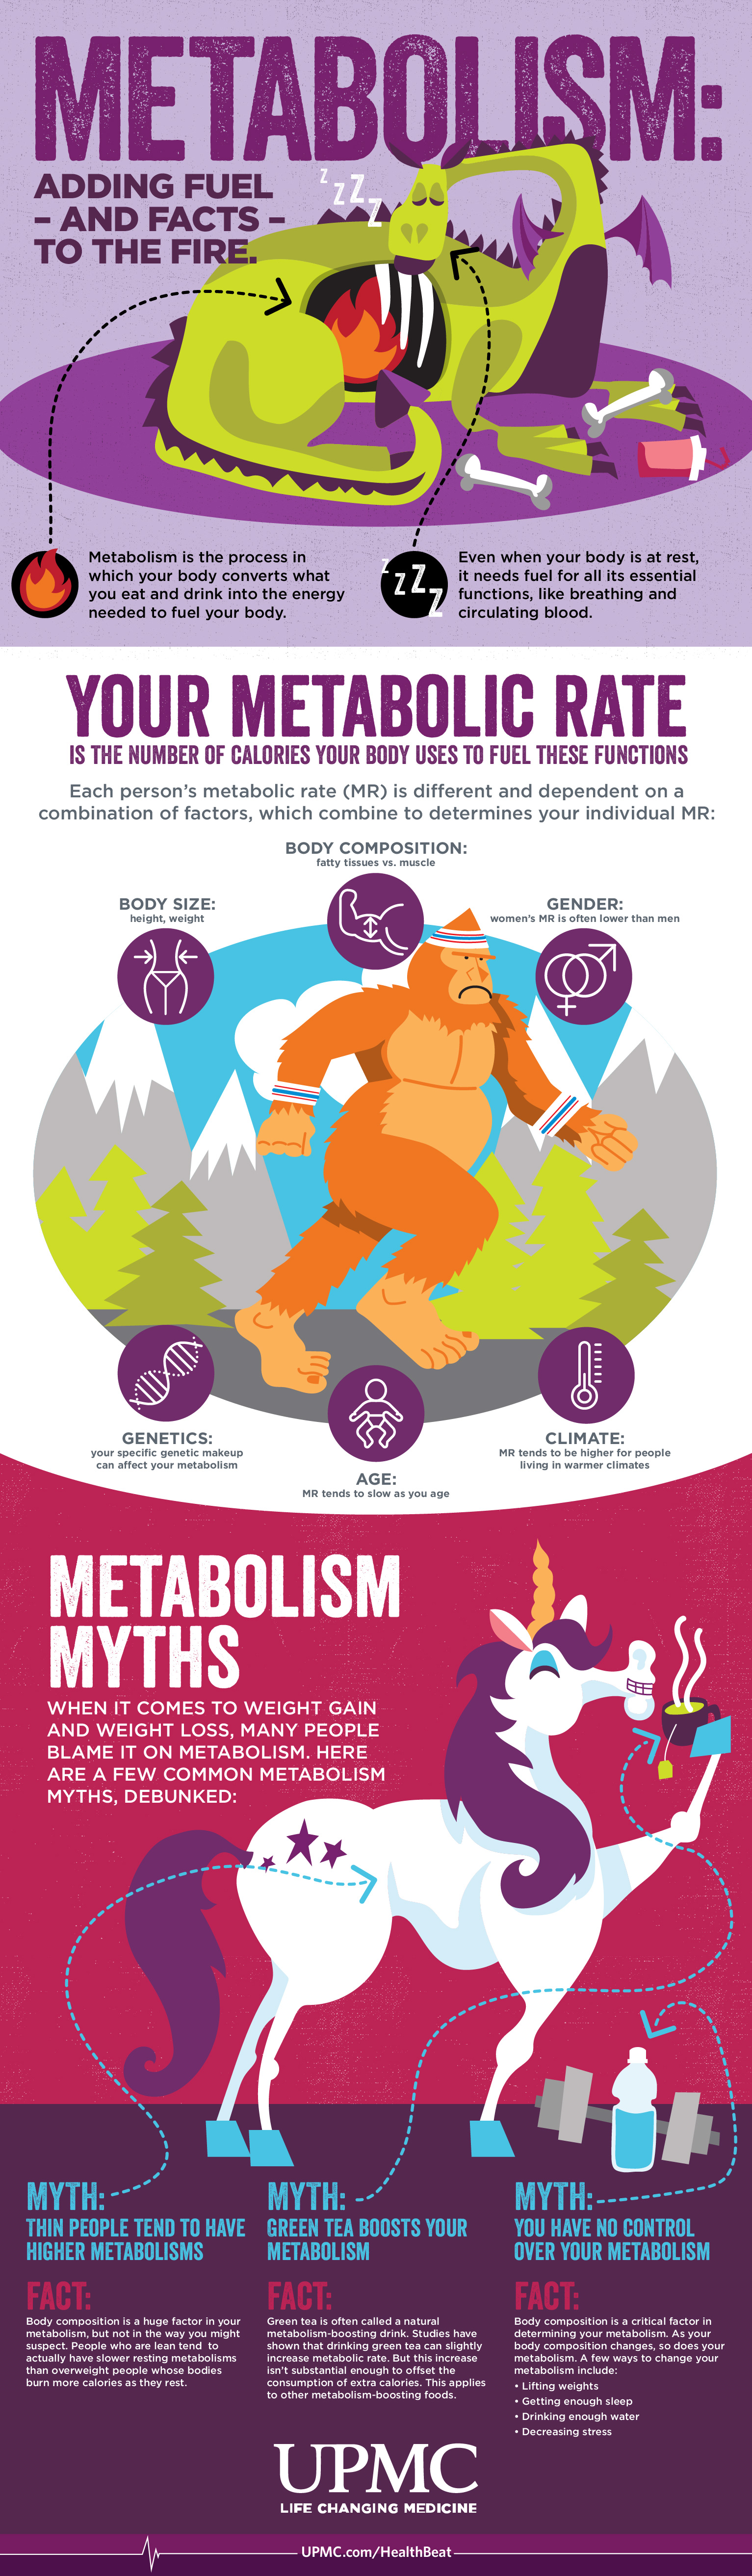 Learn more about how your metabolism functions